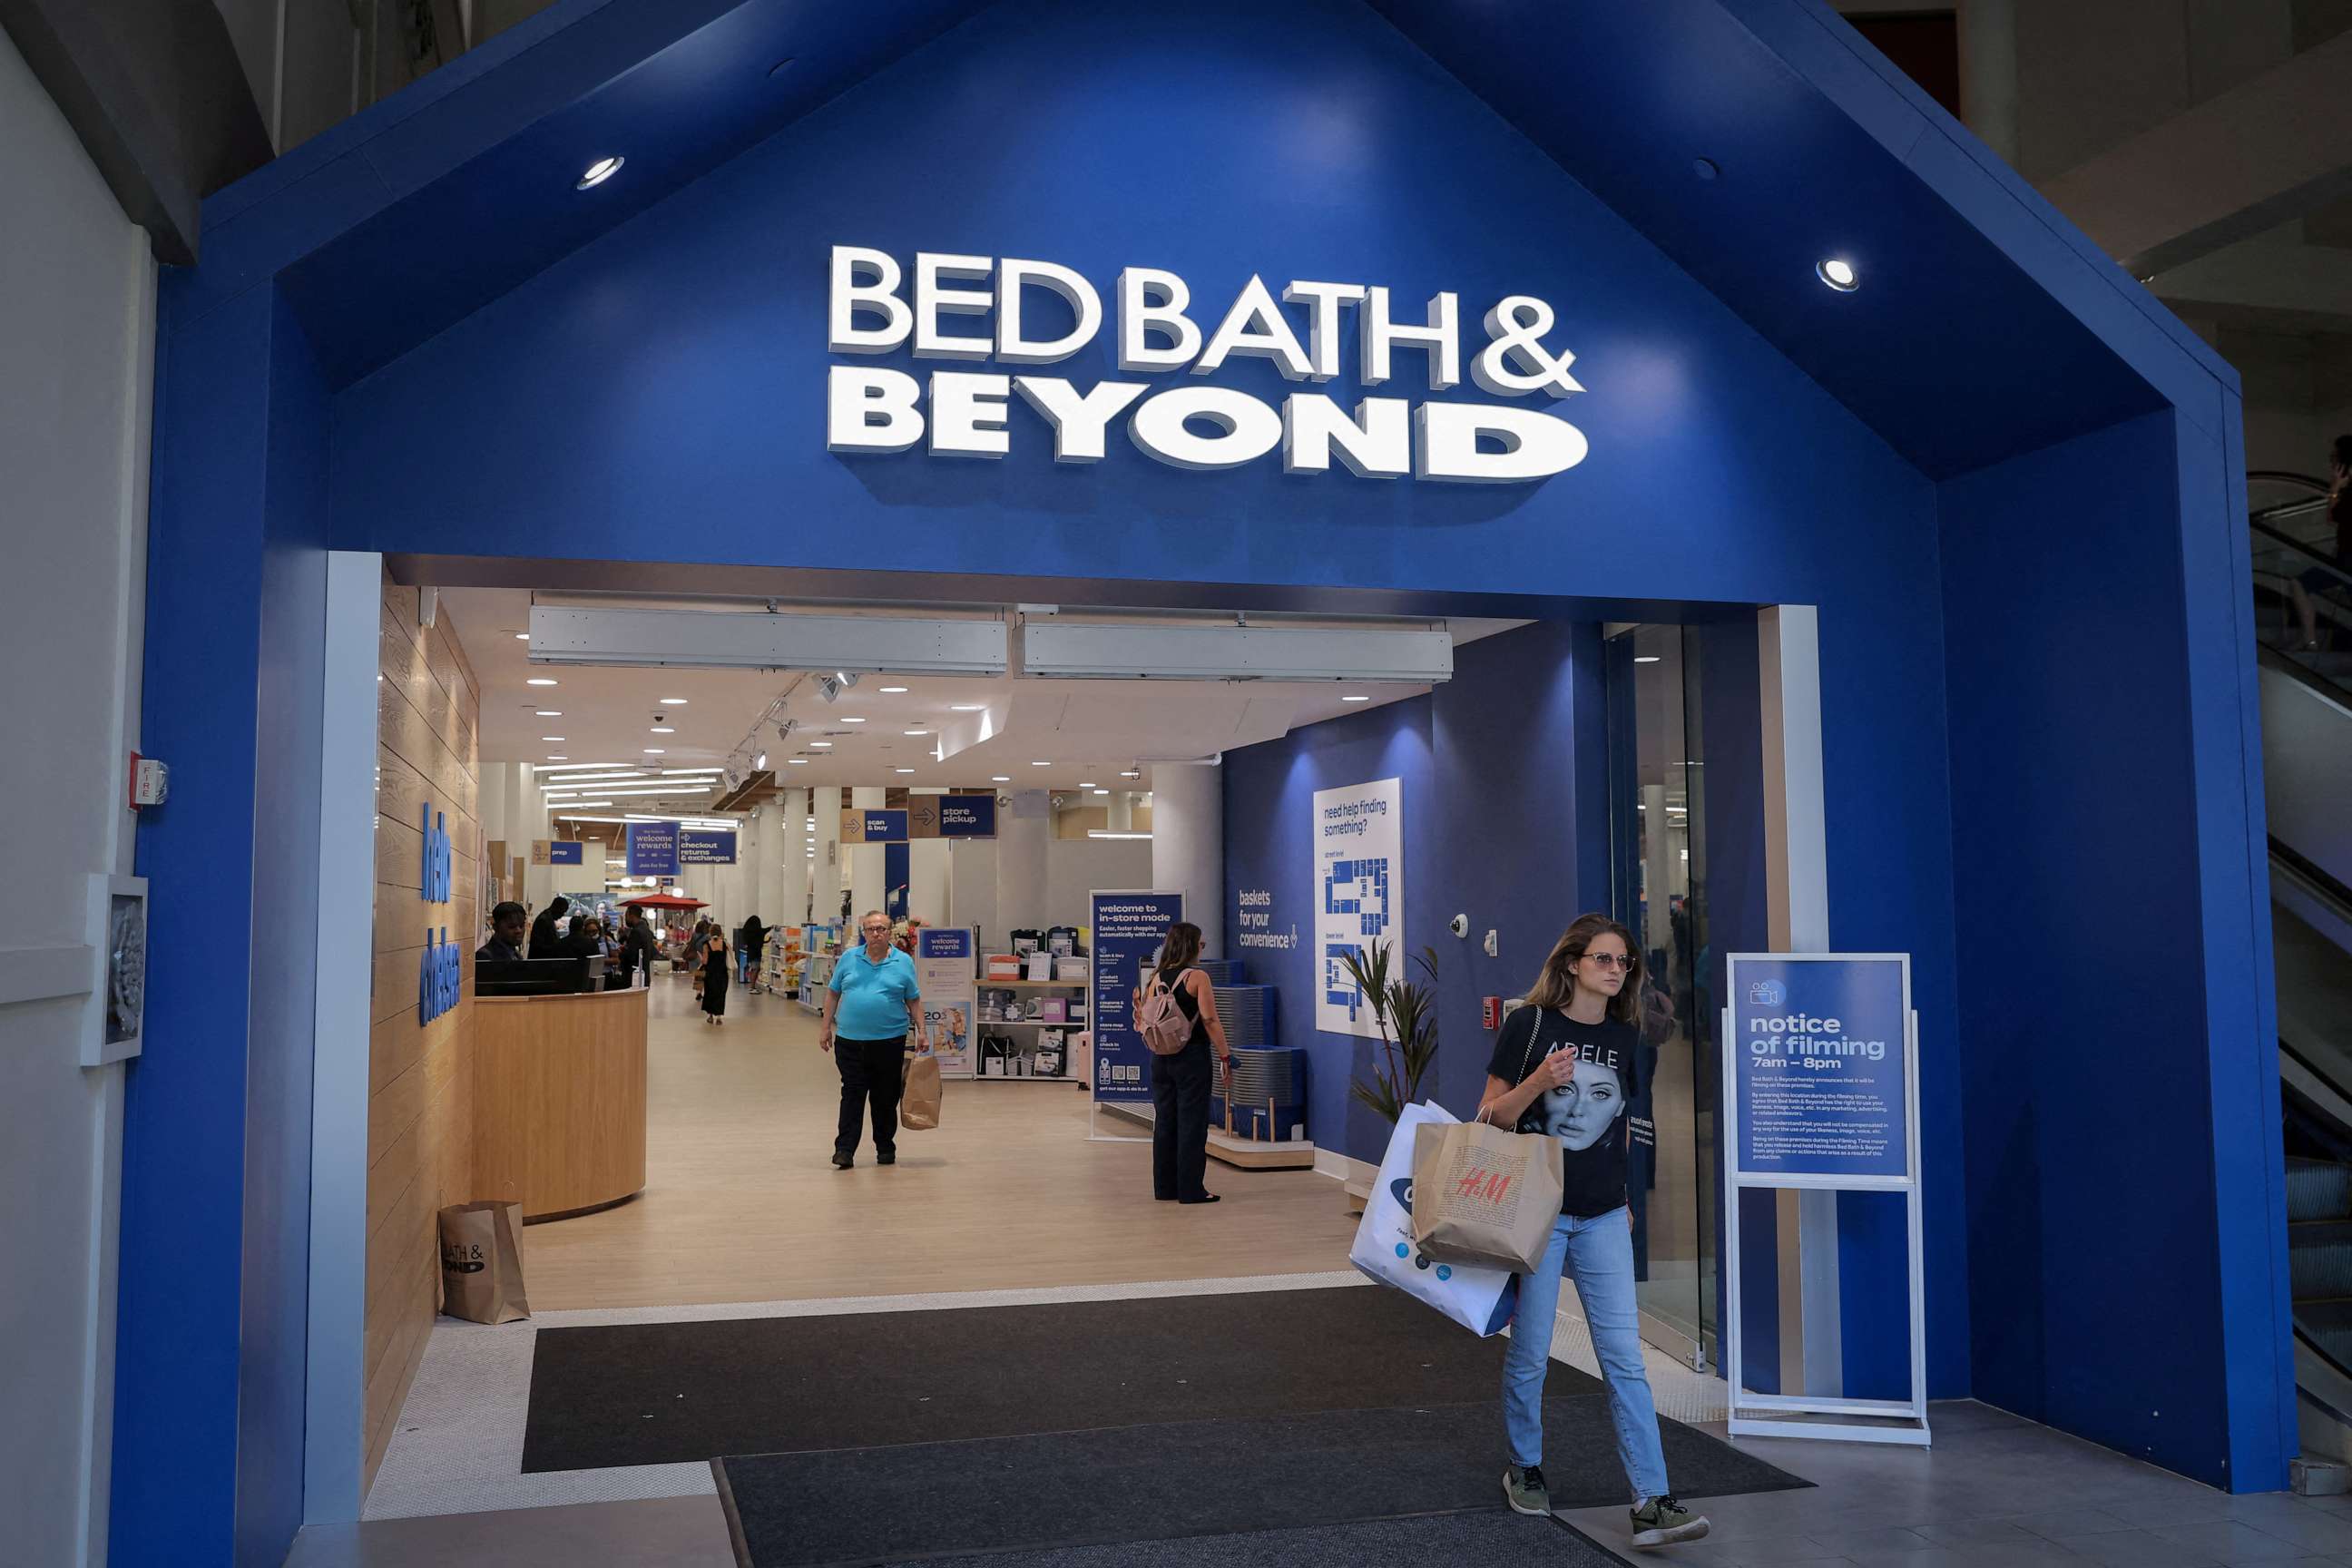 FILE PHOTO: A person exits a Bed Bath & Beyond store in Manhattan, New York City, June 29, 2022.